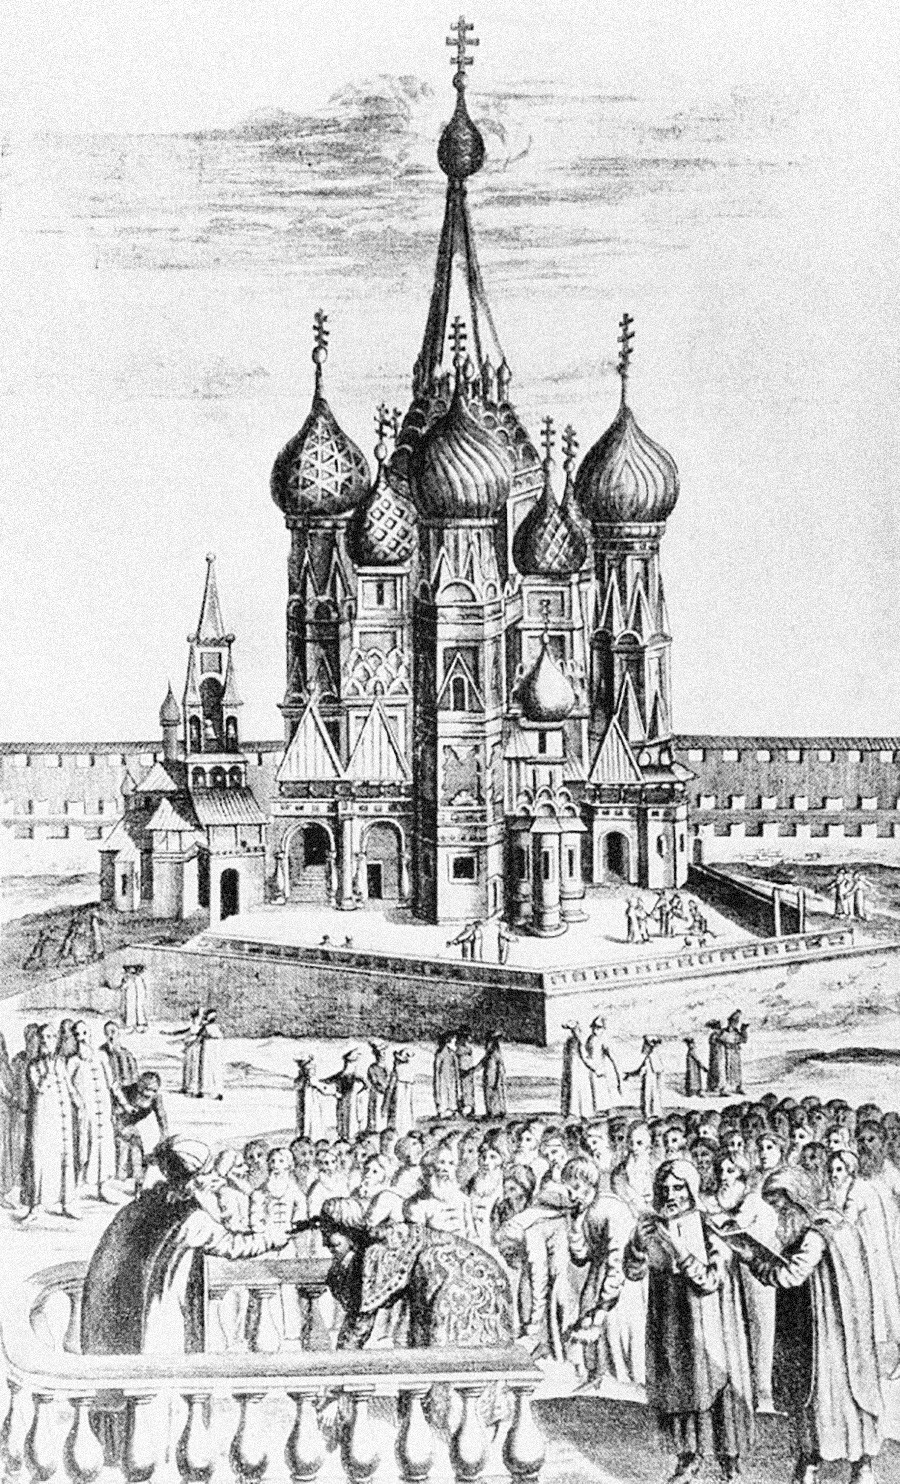 A 17th-century view of the St. Basil's Cathedral in Moscow. Woodcut, 1634.